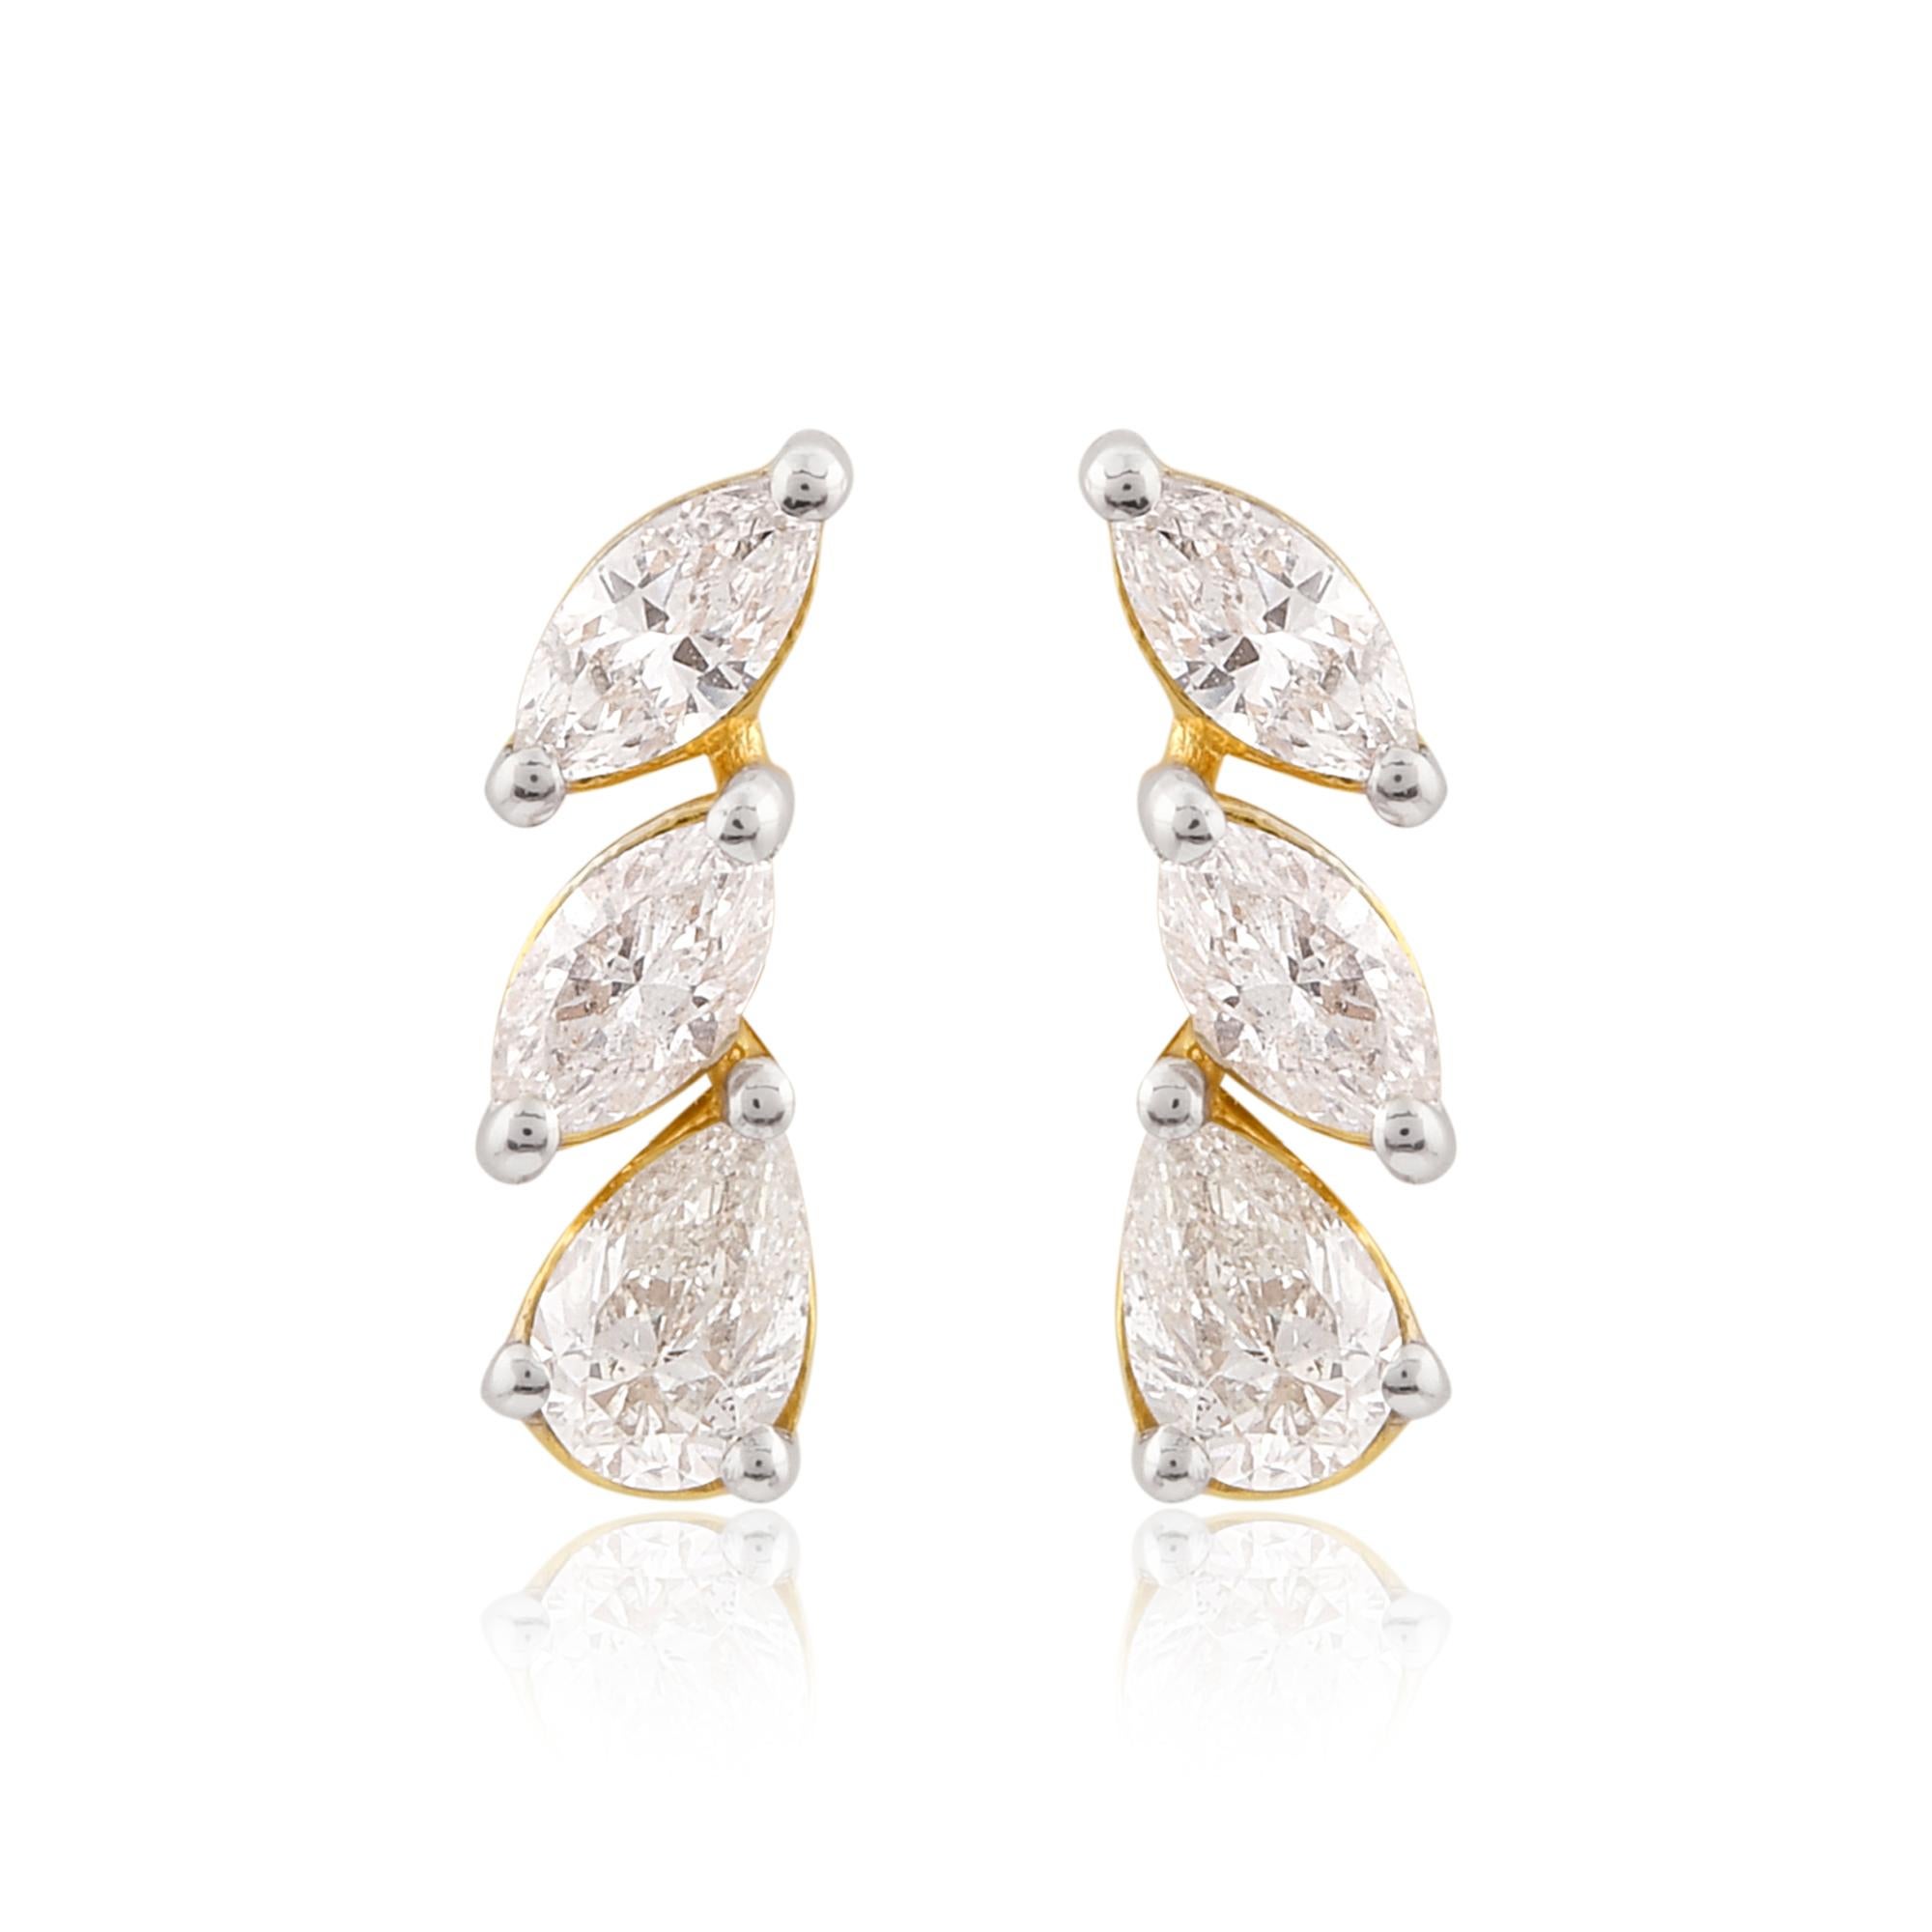 Modern SI Clarity HI Color Pear & Marquise Diamond Earrings 18k Yellow Gold Jewelry For Sale